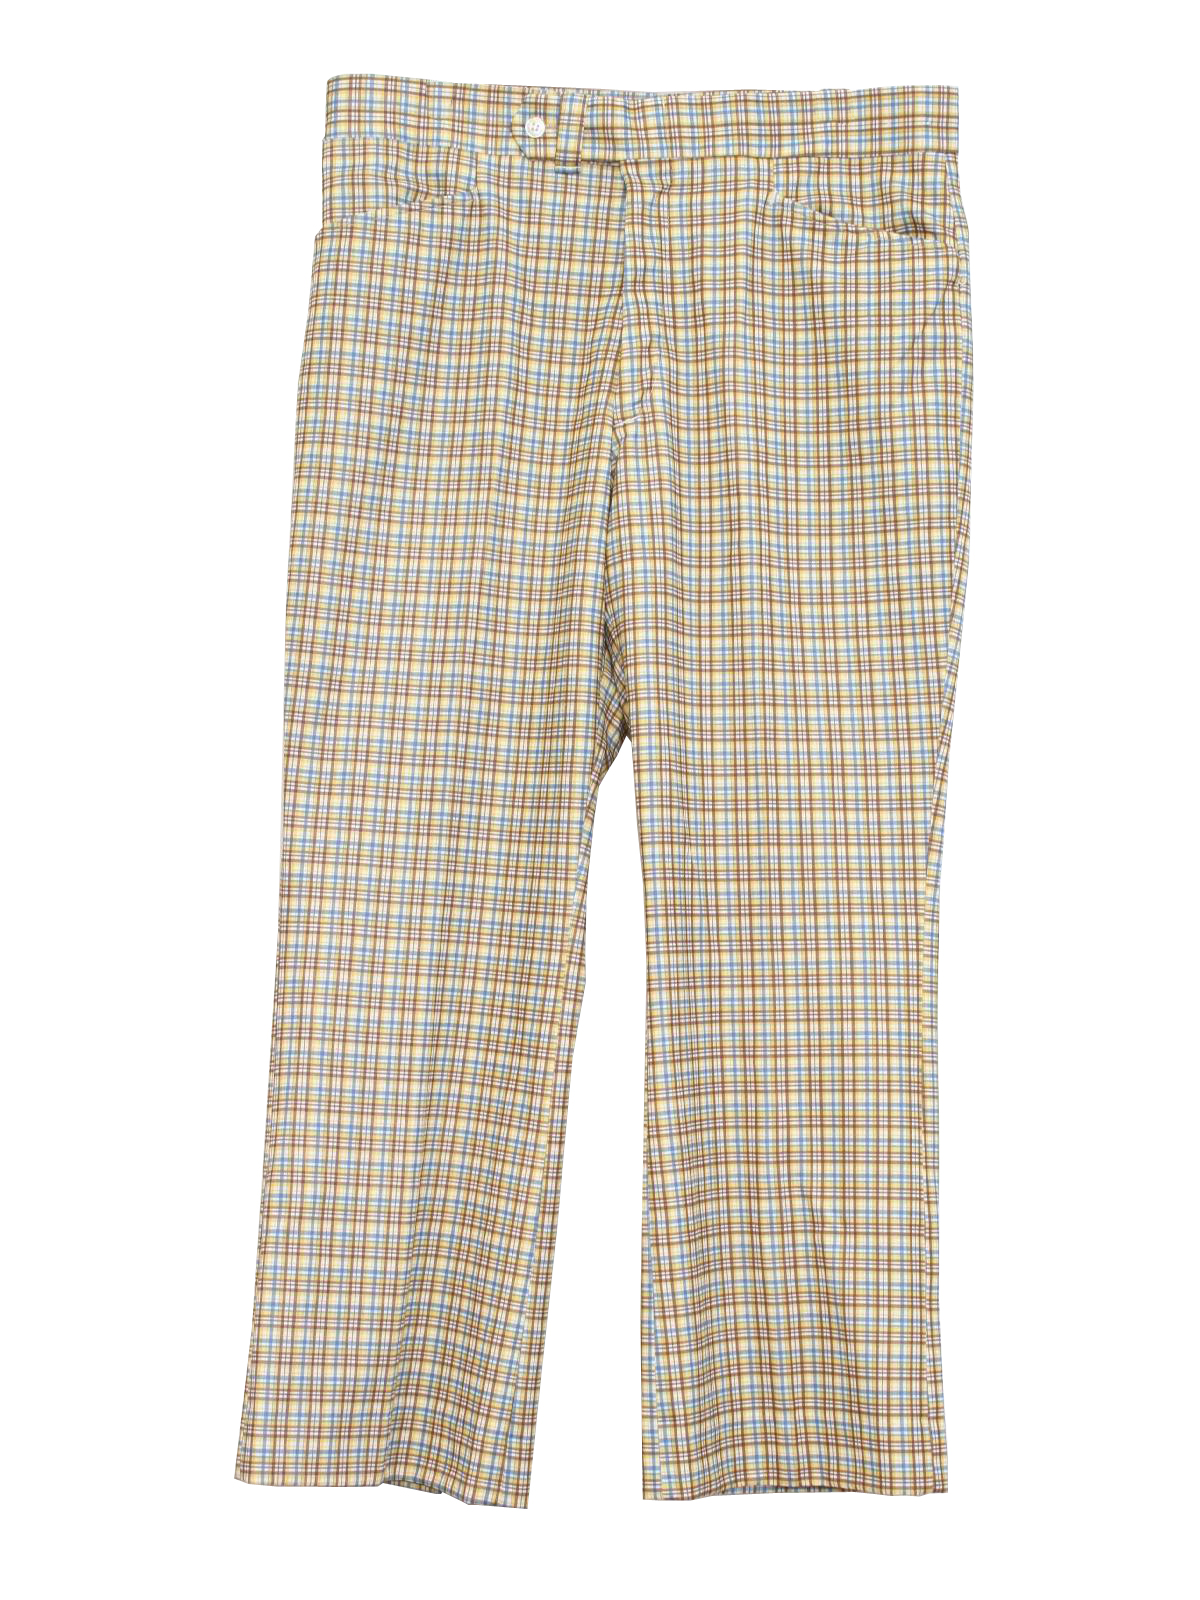 Match Play 70's Vintage Flared Pants / Flares: 70s -Match Play- Mens ...